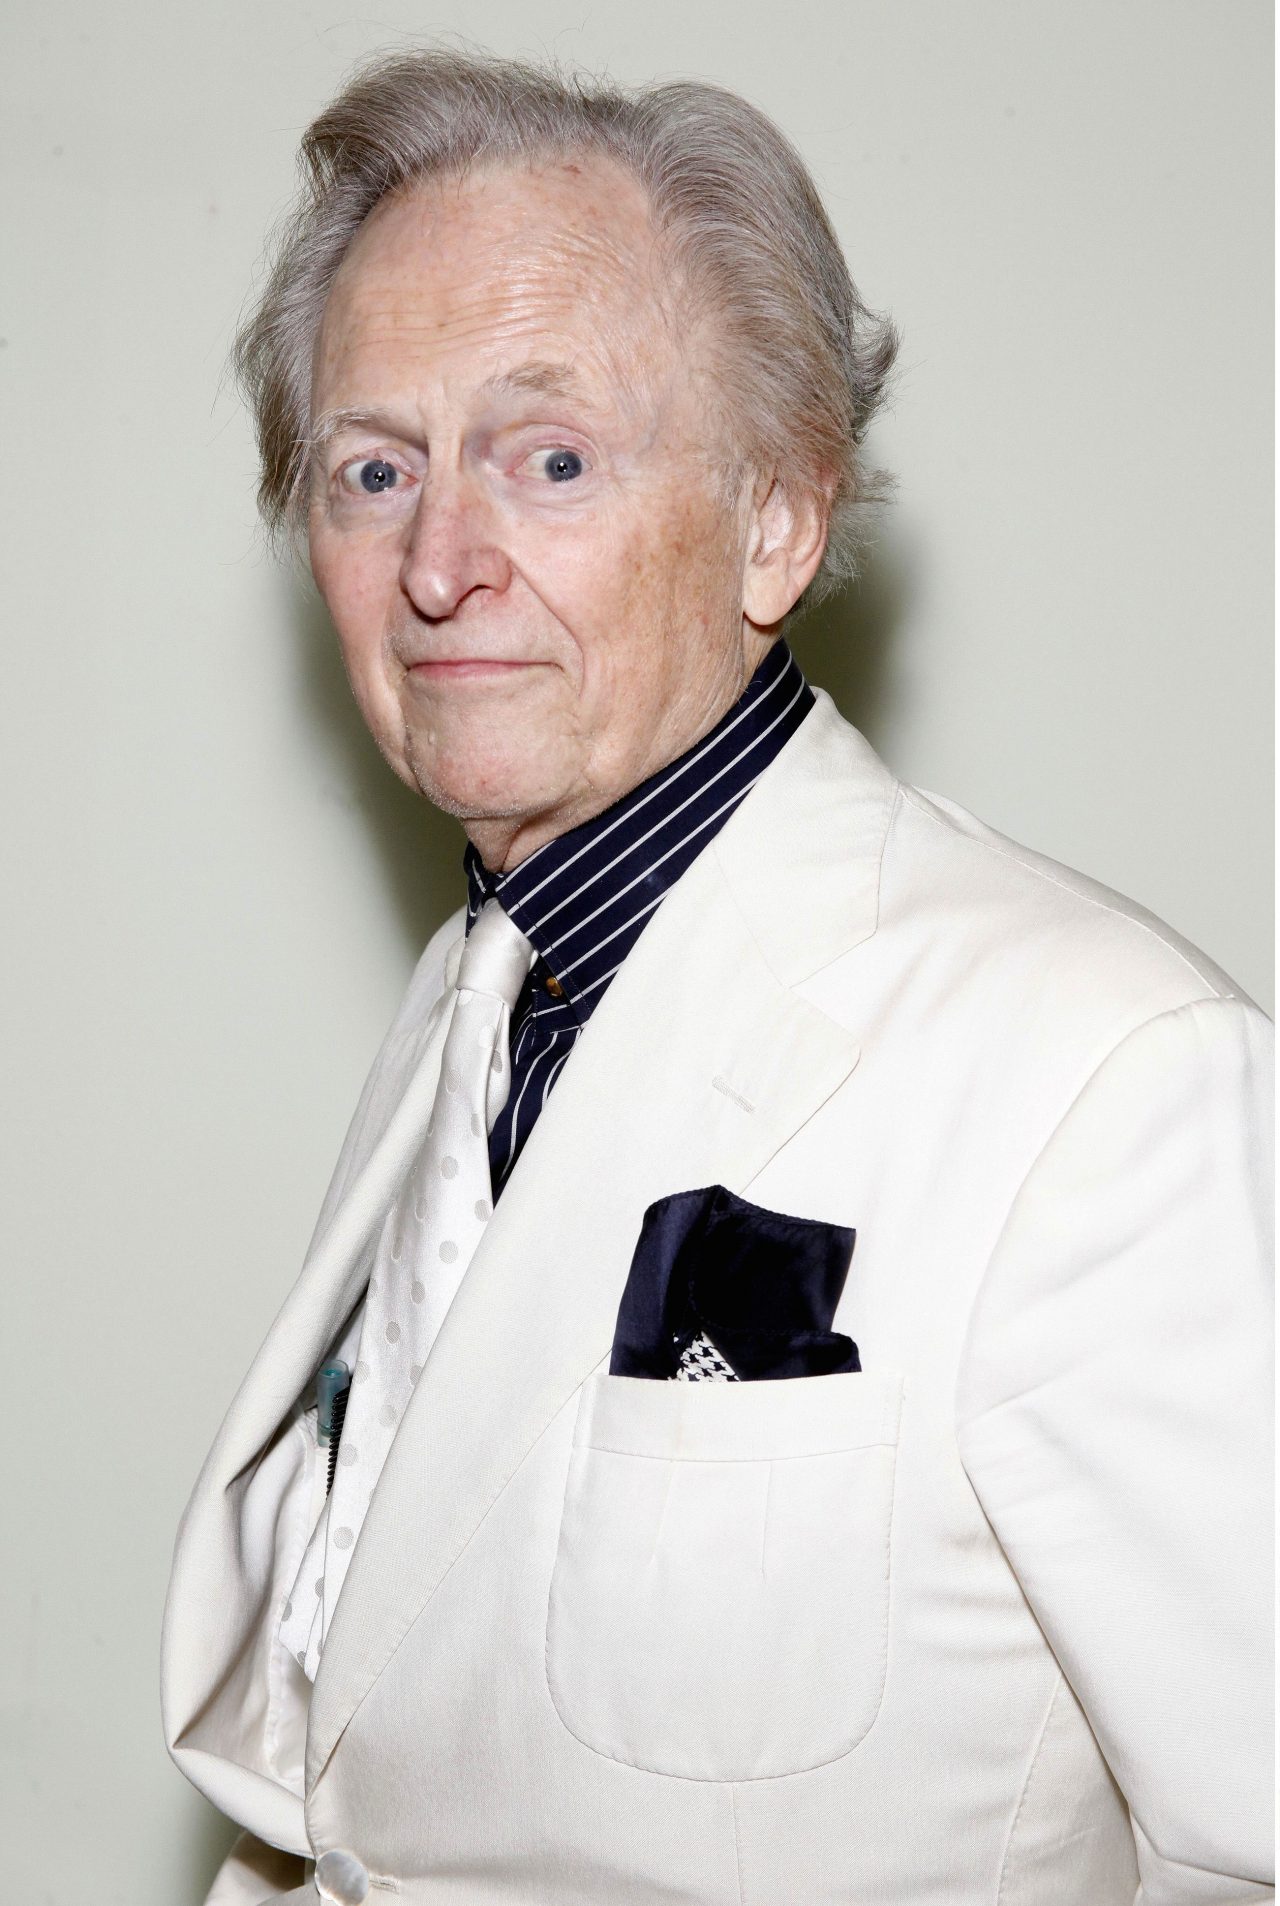 Tom Wolfe 'Back To Blood' book signing, Philadelphia, America - 25 Oct 2012